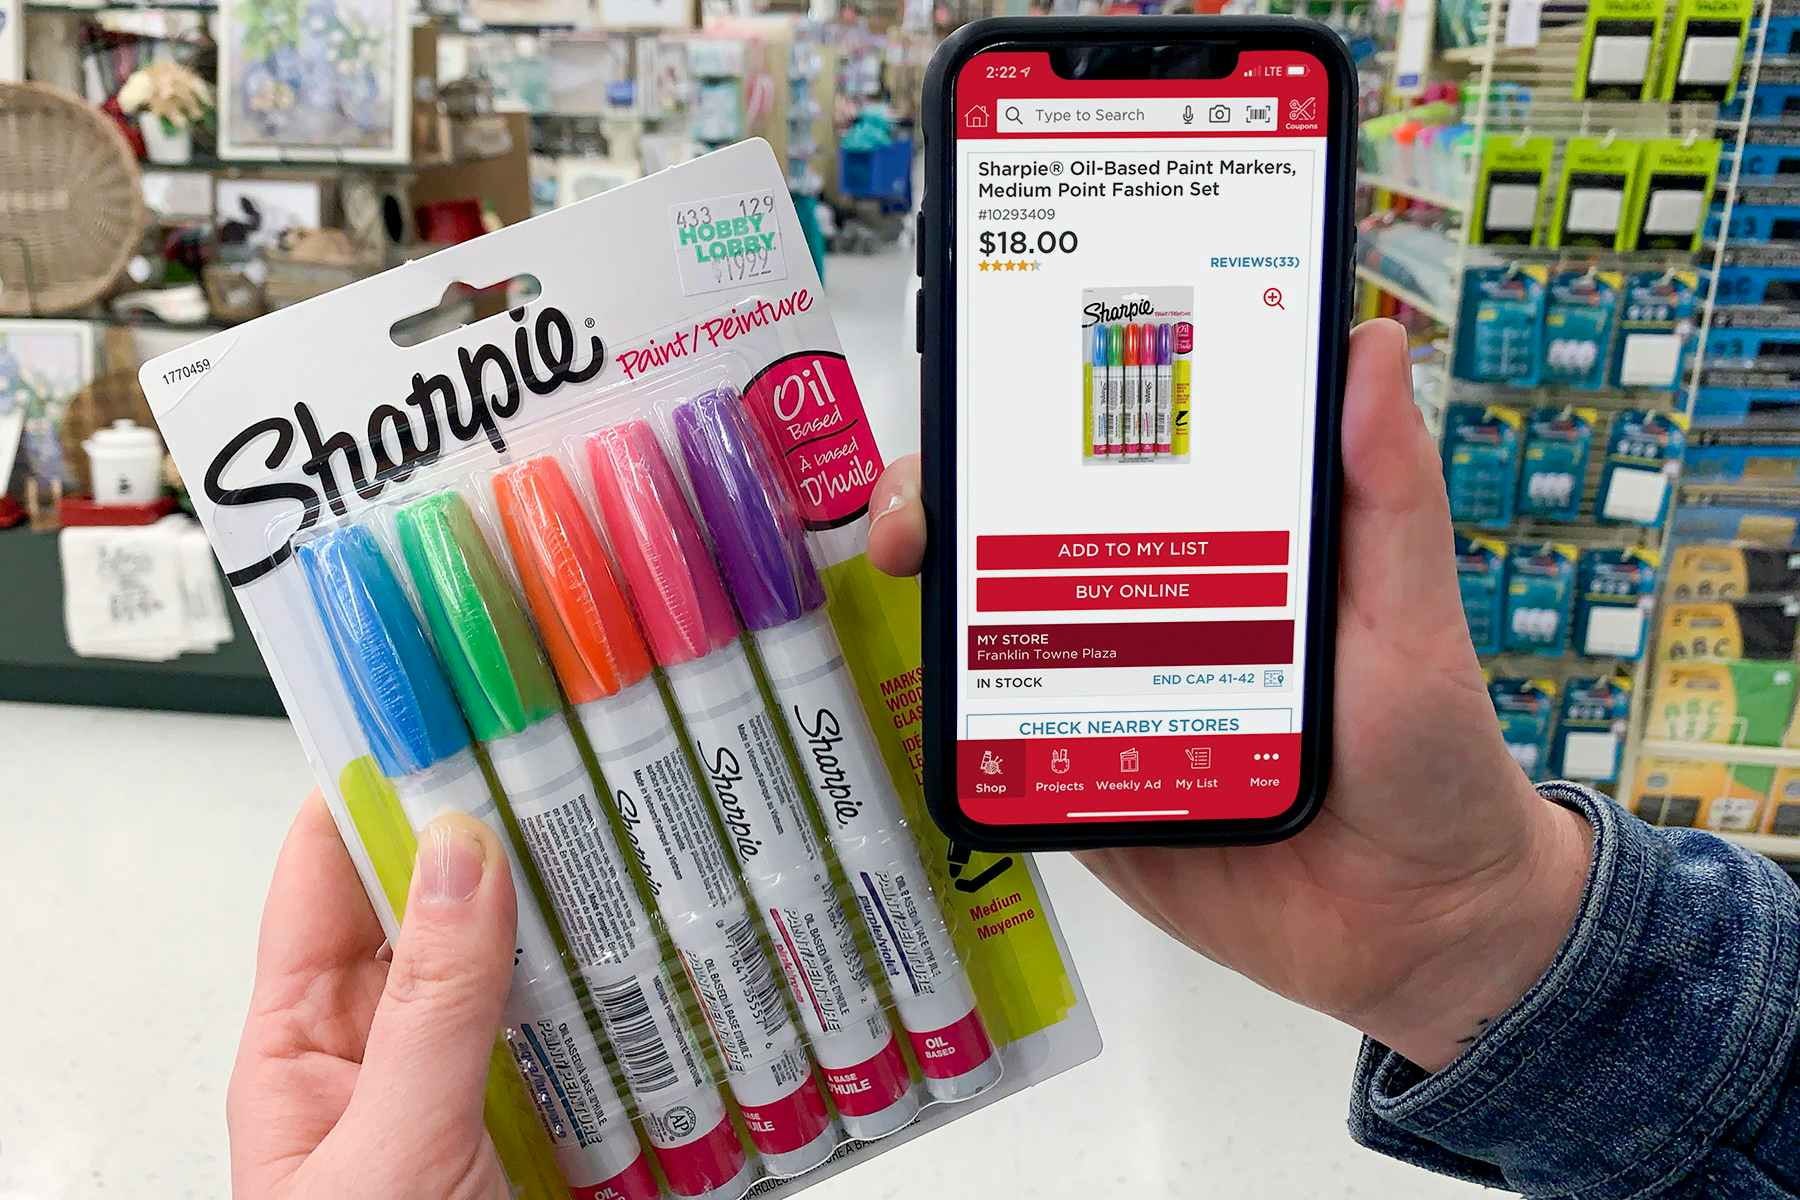 A cell phone showing the price of Sharpie Paint pens at Michaels with a pack of the same paint pens, featuring a higher price at Hobby Lo...